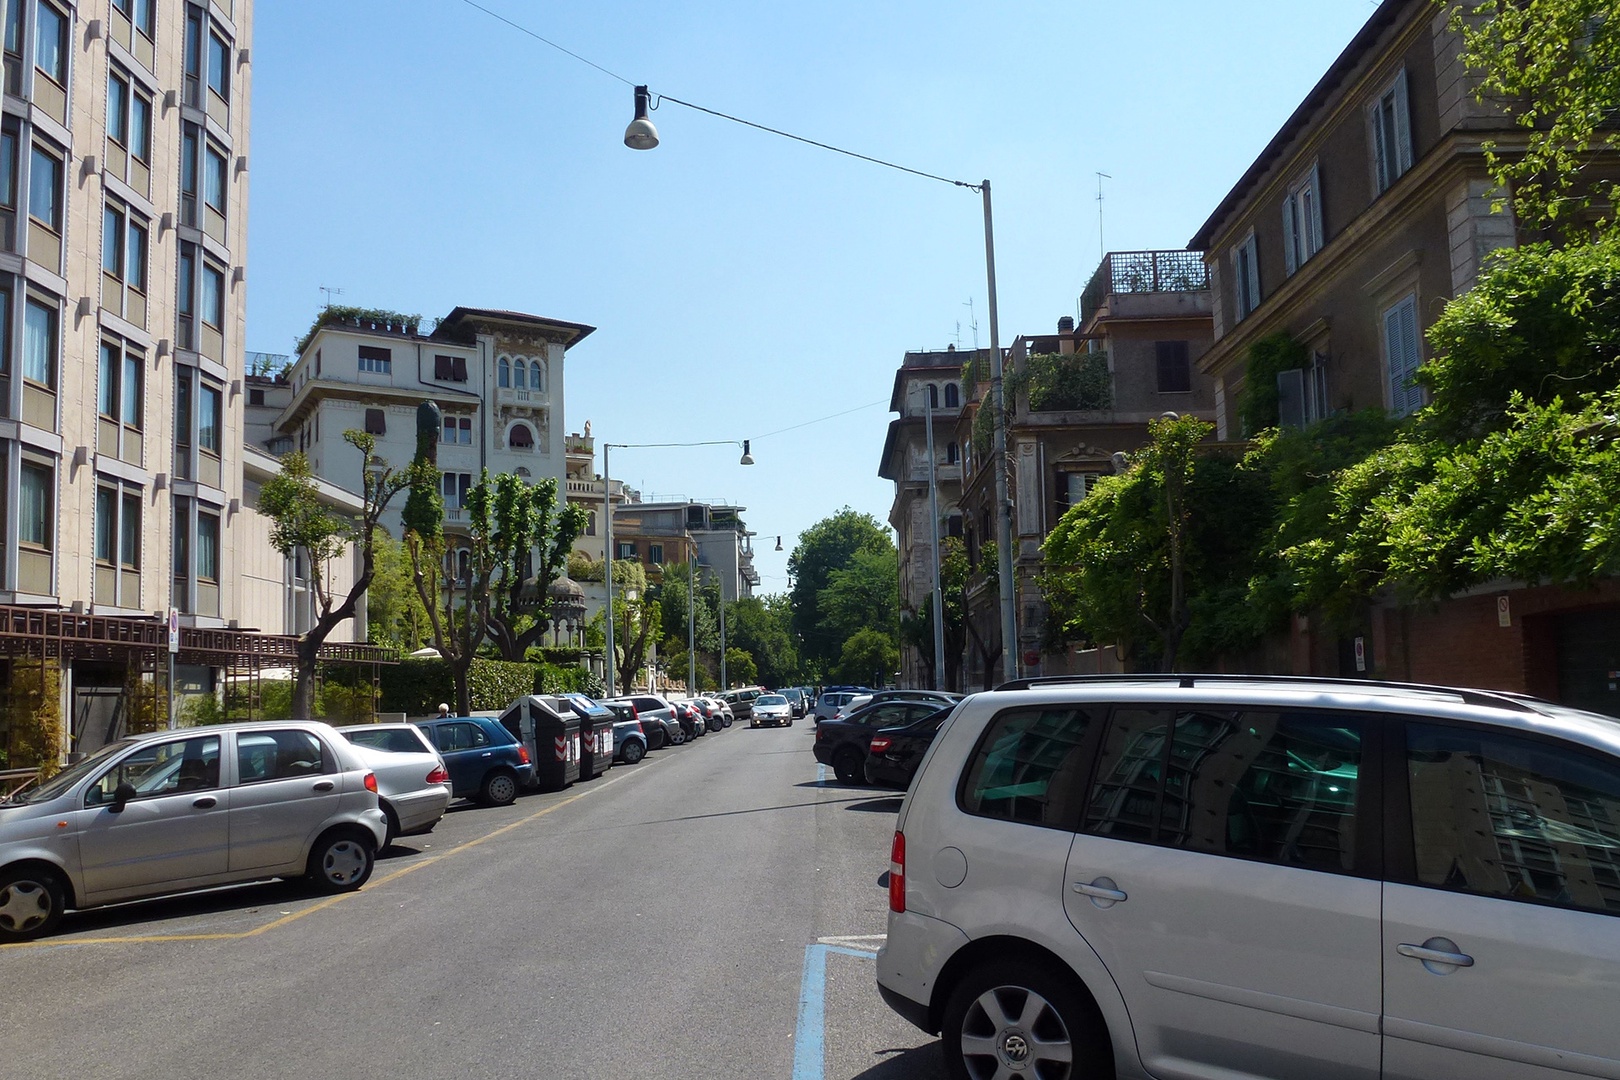 Tree lined street on which the apartment is located is characteristic of the Prati area of Rome.